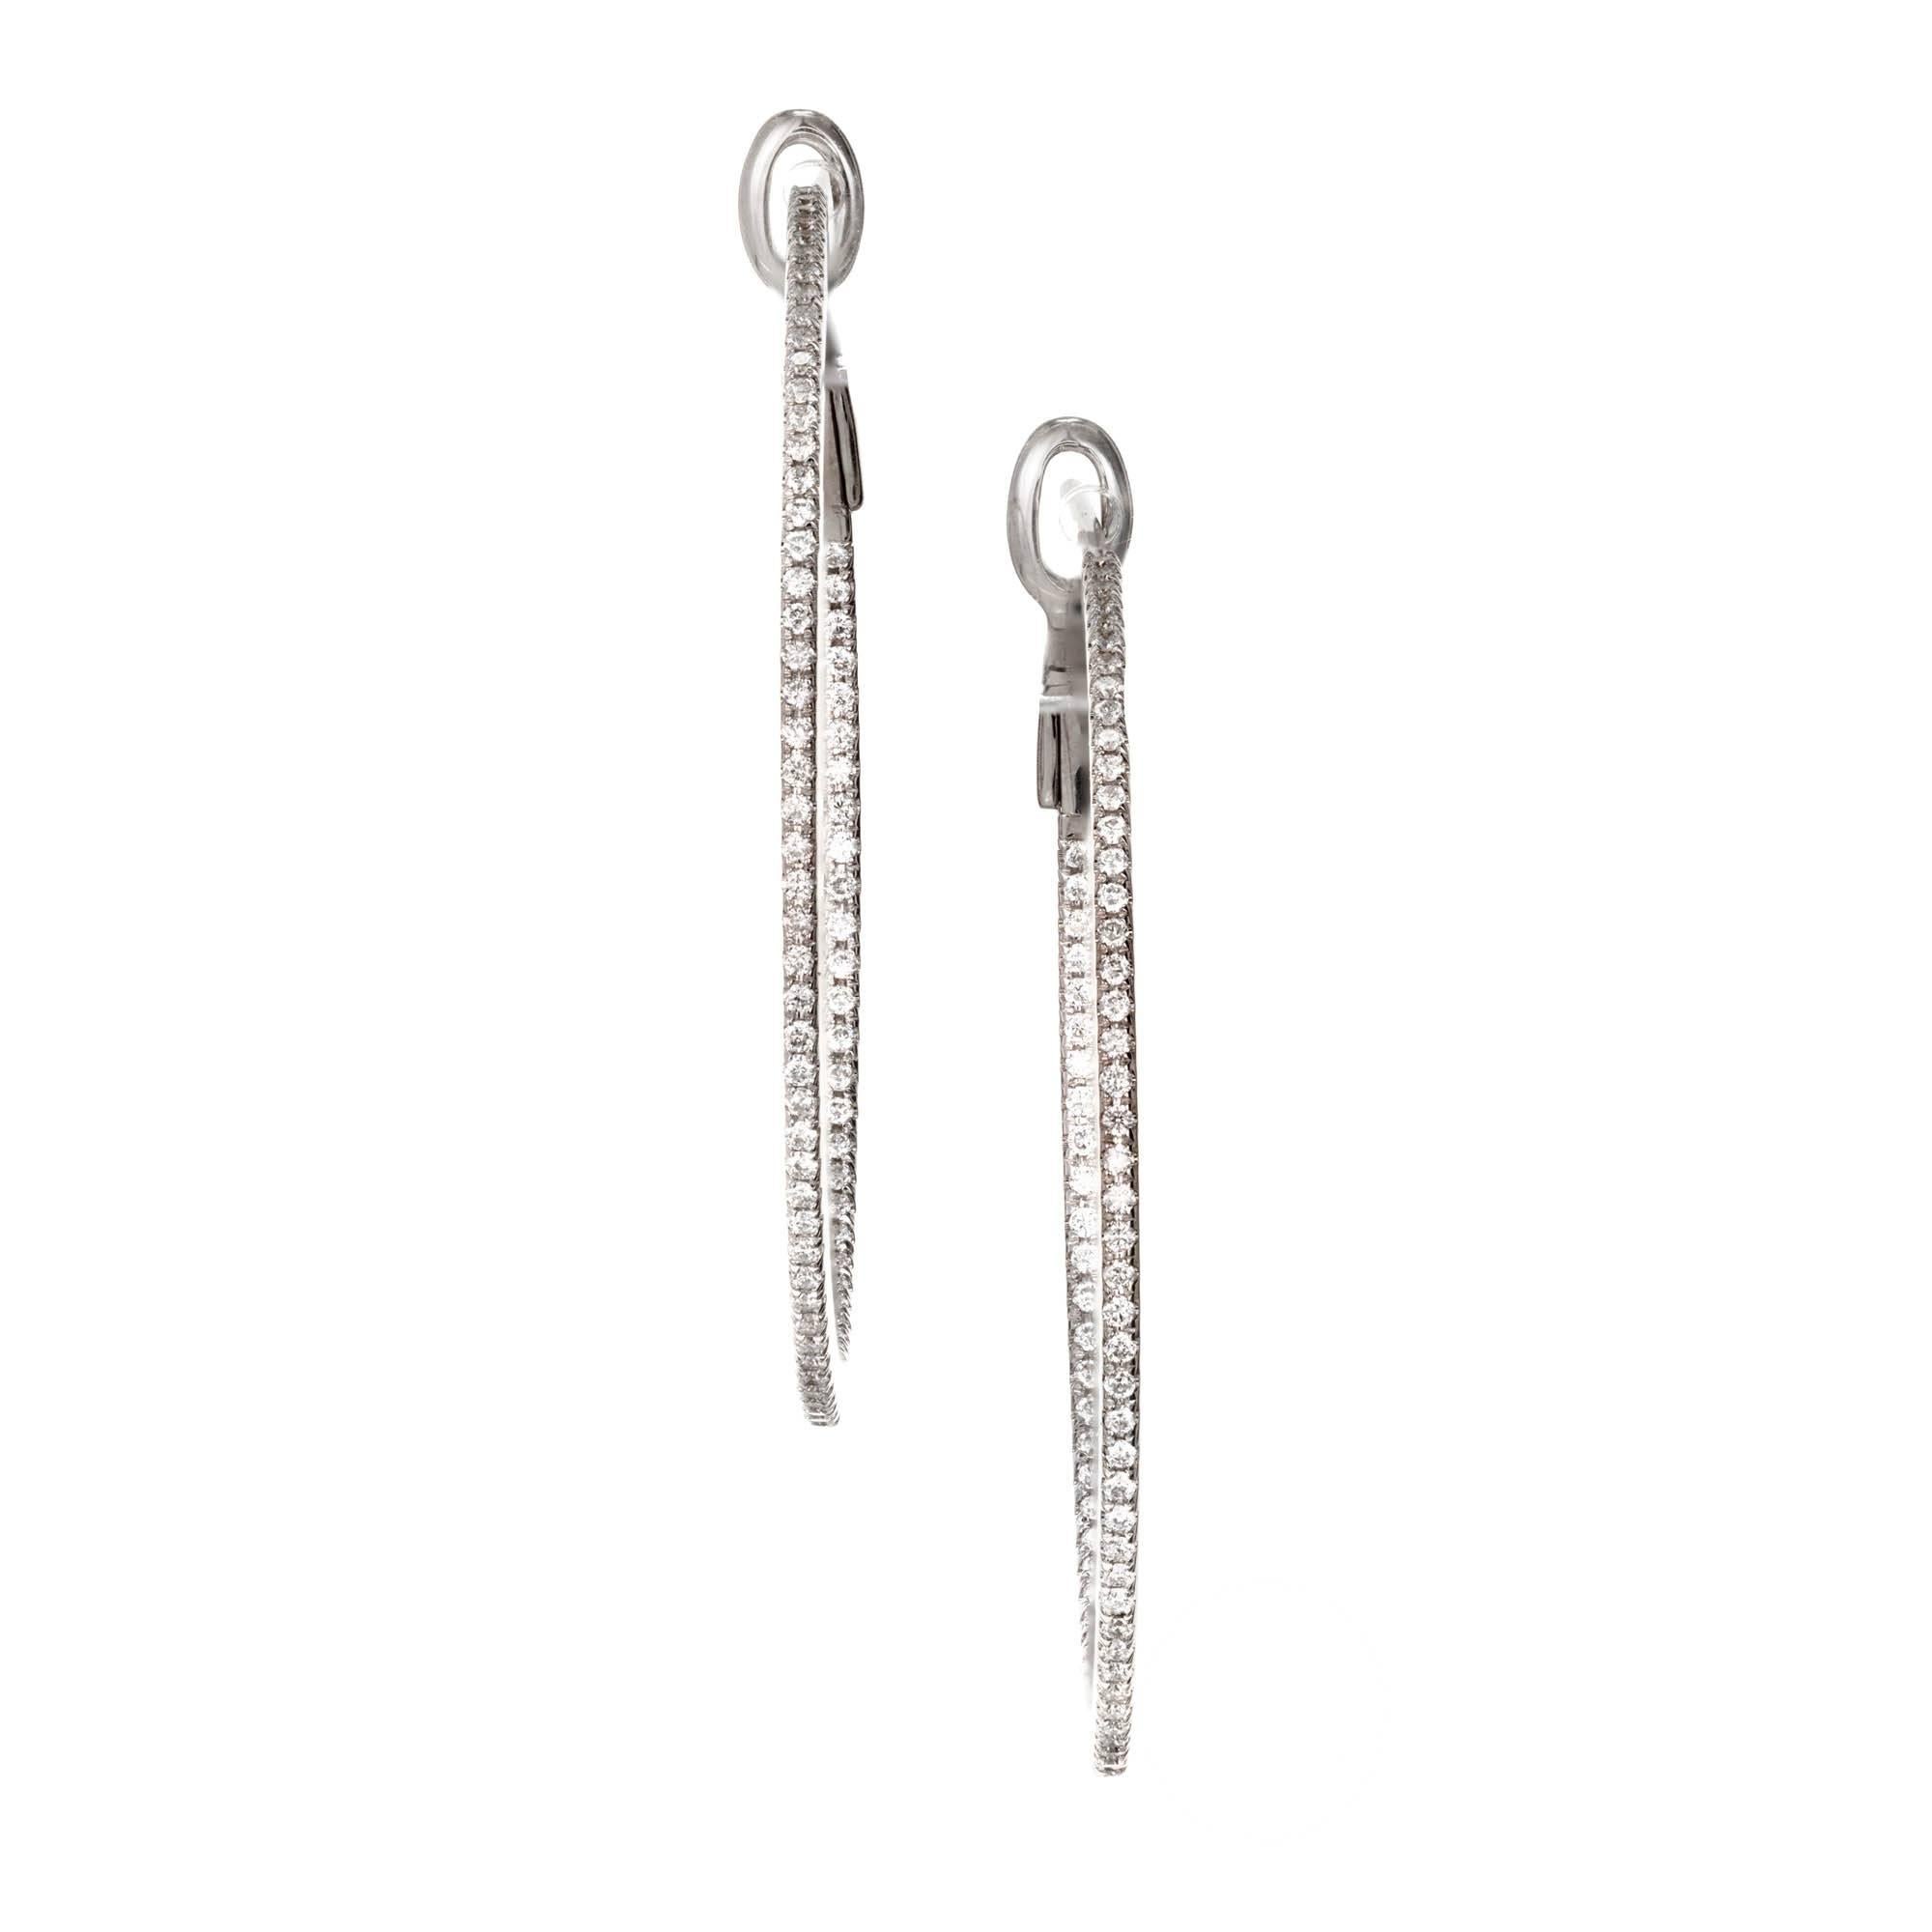 18k white gold diamond hoop earrings set inside and out with round brilliant cut diamonds. 48 diamonds set on the outside with 29 diamonds set on the inside.

154 round diamonds GH VS 1mm Approximate .77 carats
18k White Gold
Tested: 18k
Stamped: